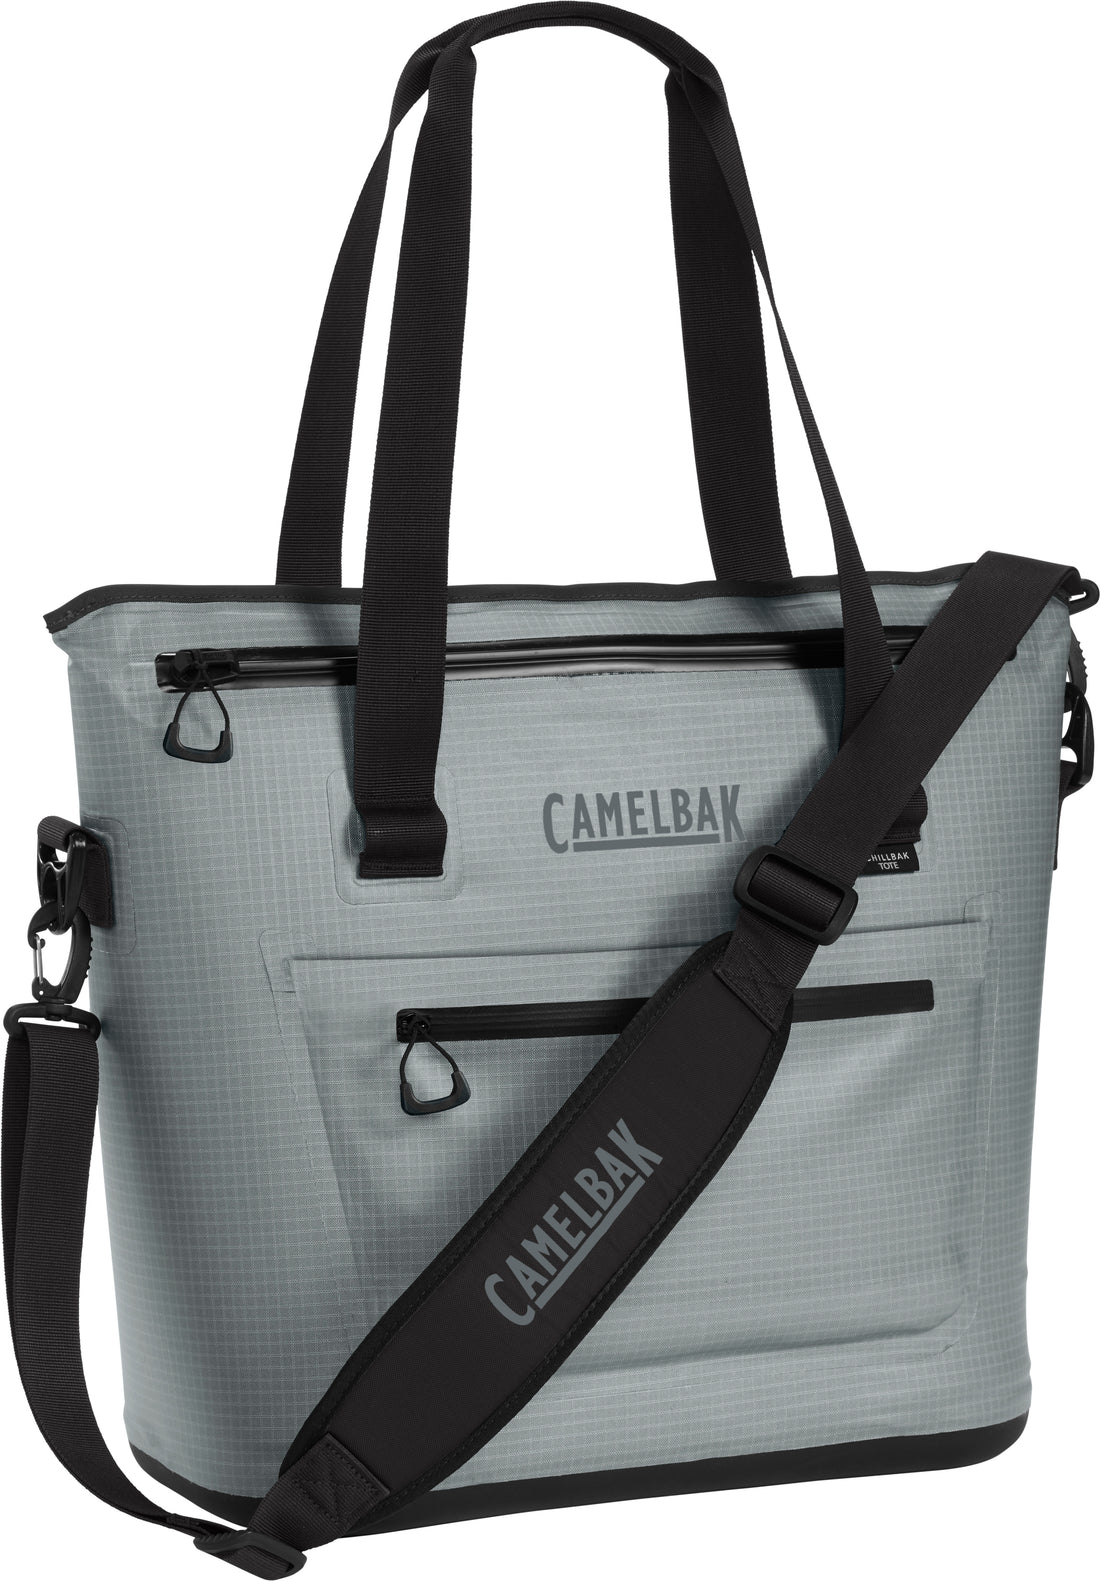 Camelbak|Chillbak_TOTE_18|Cycle_LM